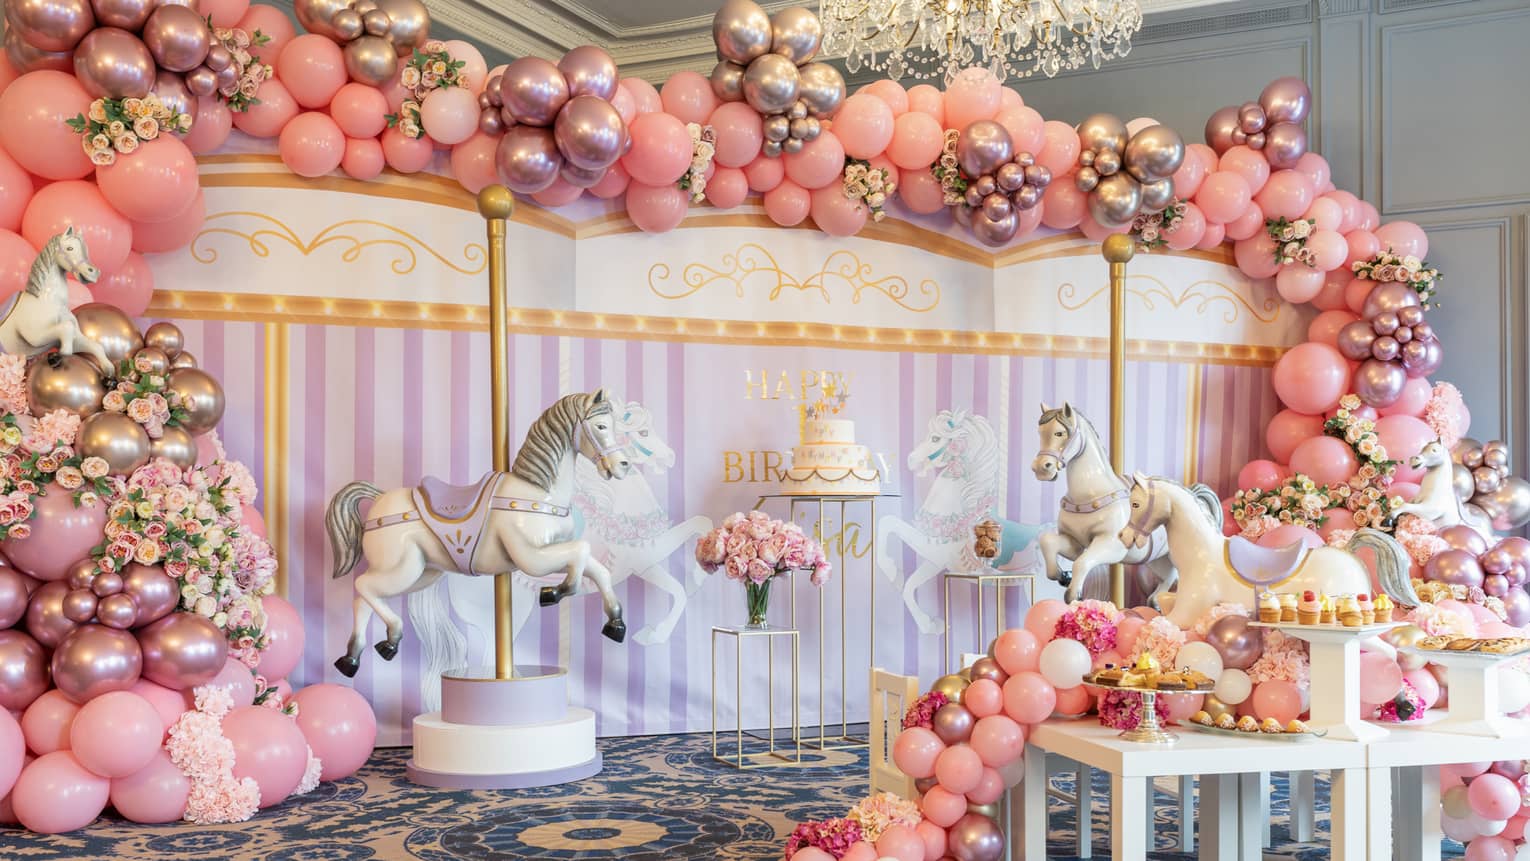 Pink carousel themed decorations fill an event space